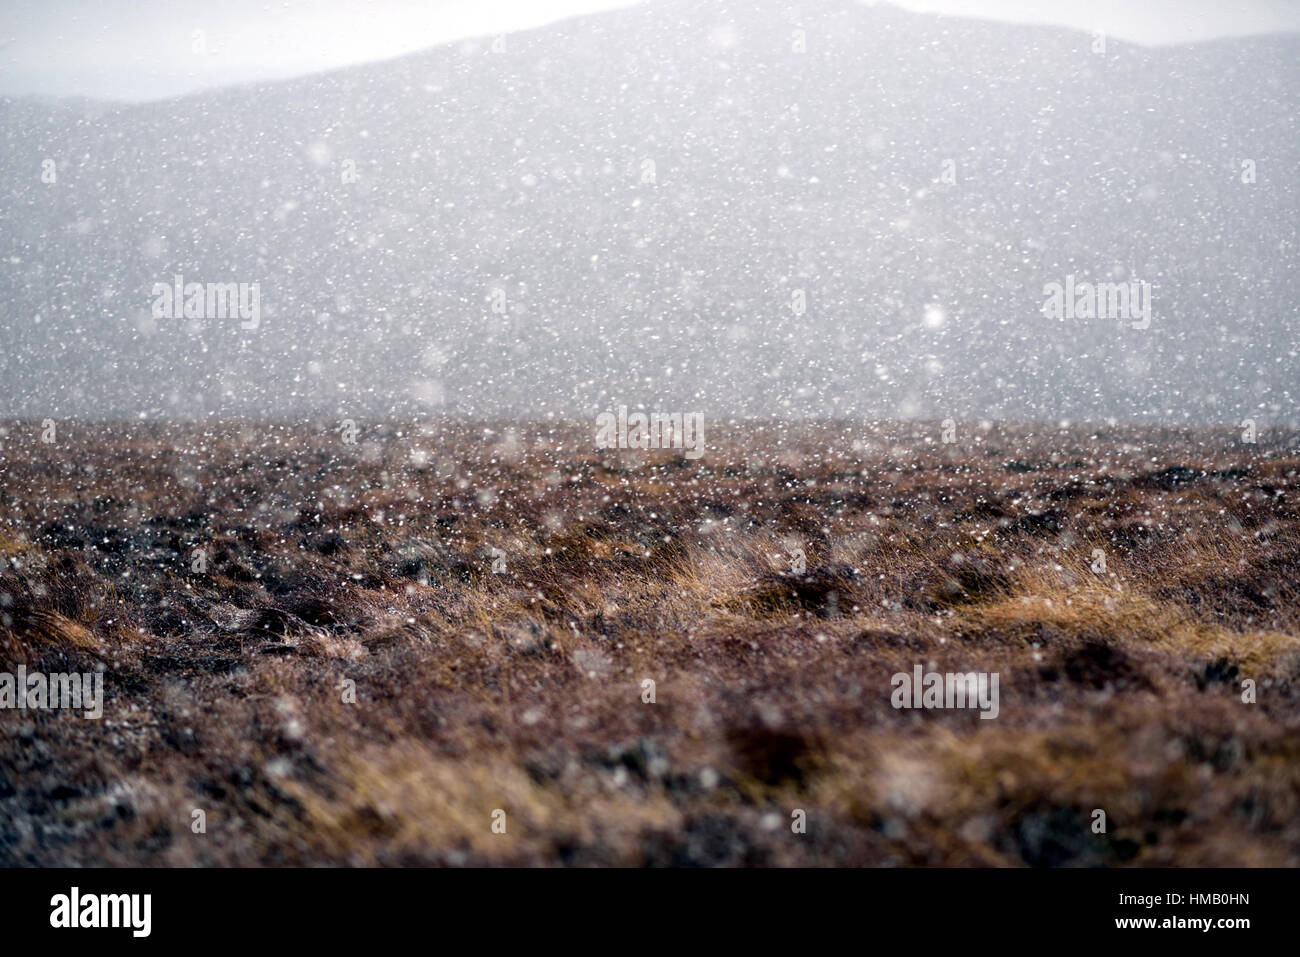 Wetter-Panne in Wicklow Mountains - Irland Stockfoto